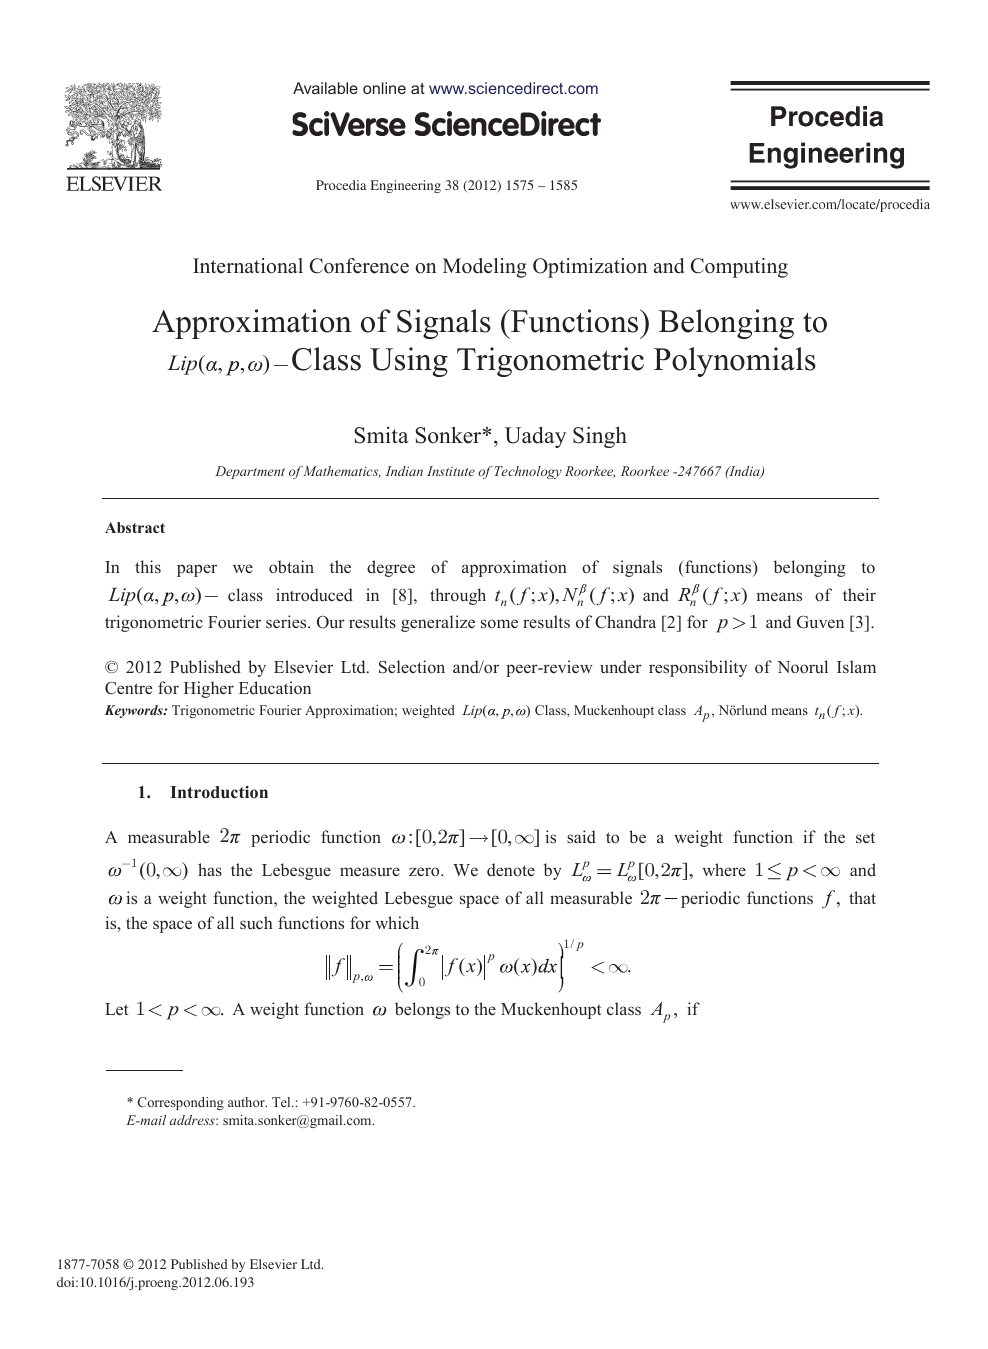 Approximation Of Signals Functions Belonging To Lip A P W Class Using Trigonometric Polynomials Topic Of Research Paper In Mathematics Download Scholarly Article Pdf And Read For Free On Cyberleninka Open Science Hub